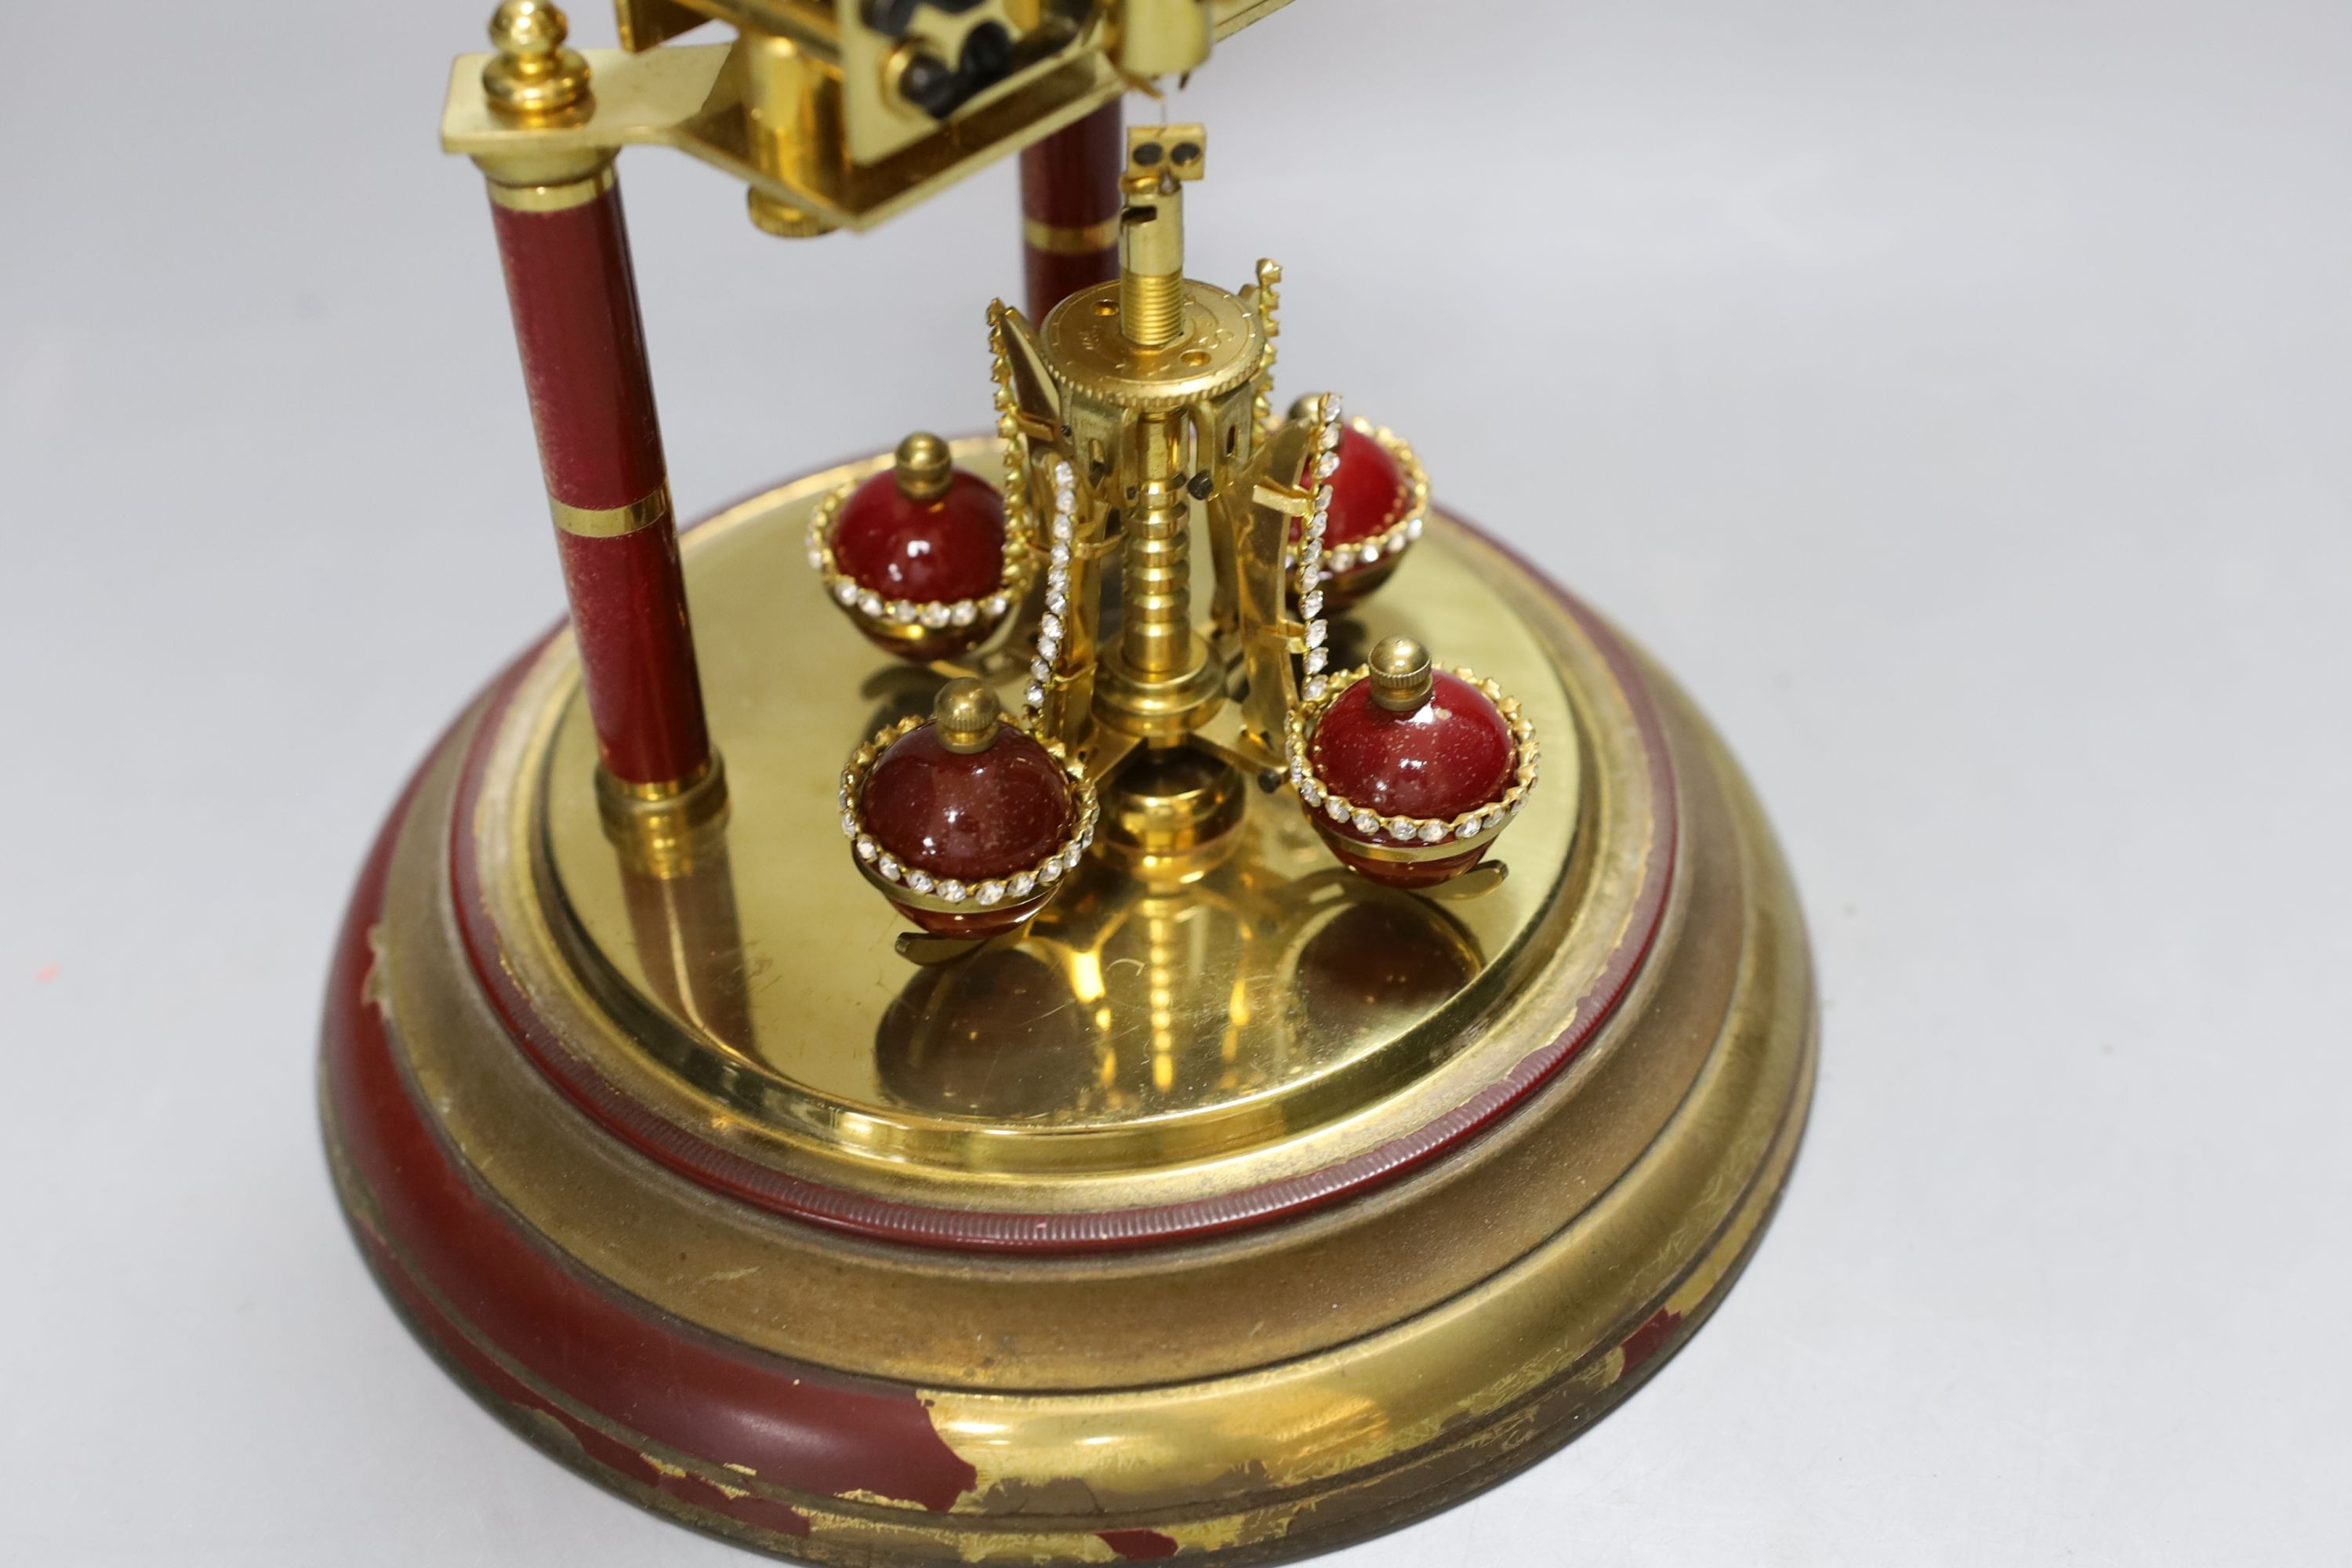 A domed Schatz 400-day anniversary red type design dial clock - 31cm tall